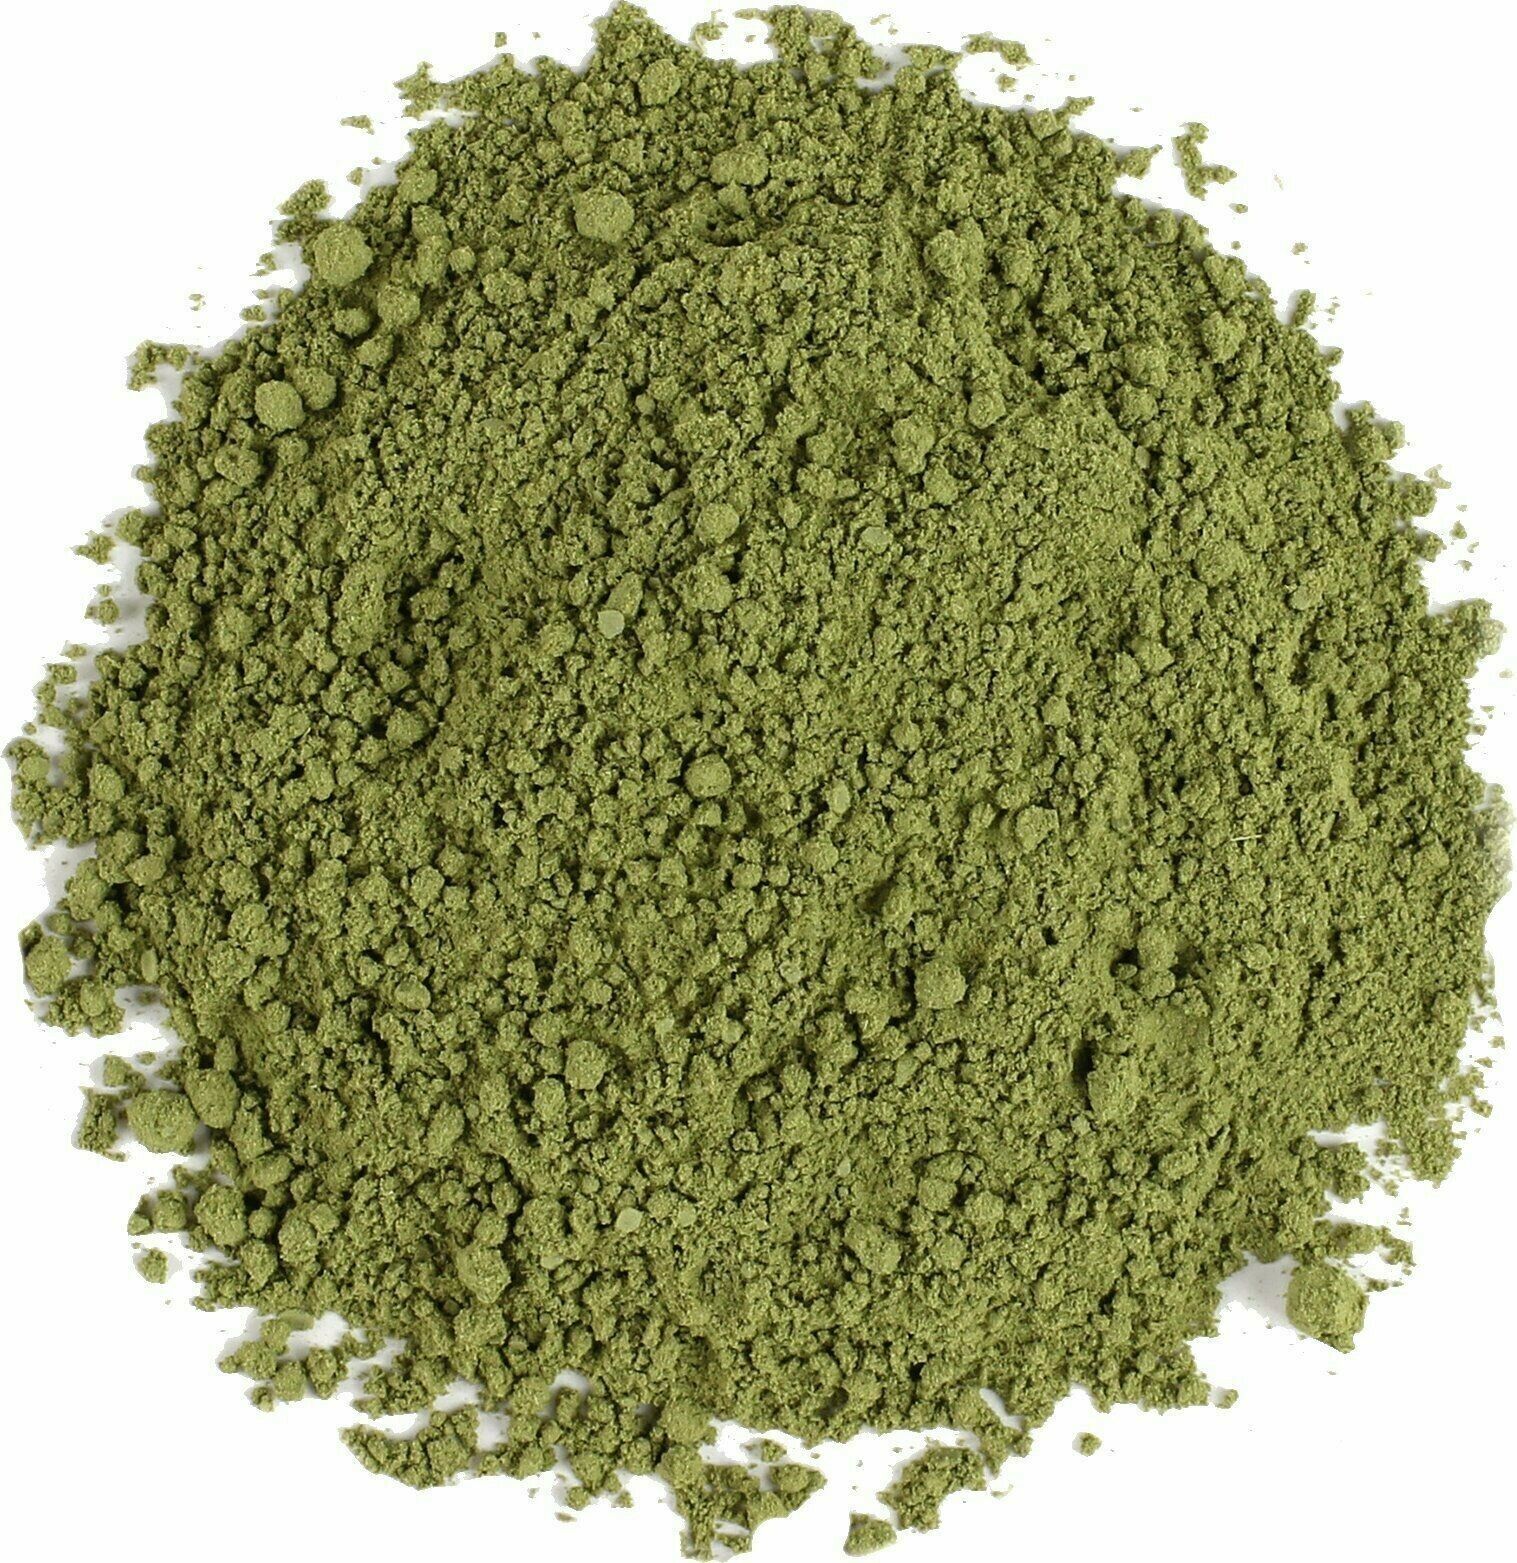 Primary image for Frontier Co-op Matcha Green Tea Powder, Certified Organic, Kosher, Non-Irradi...